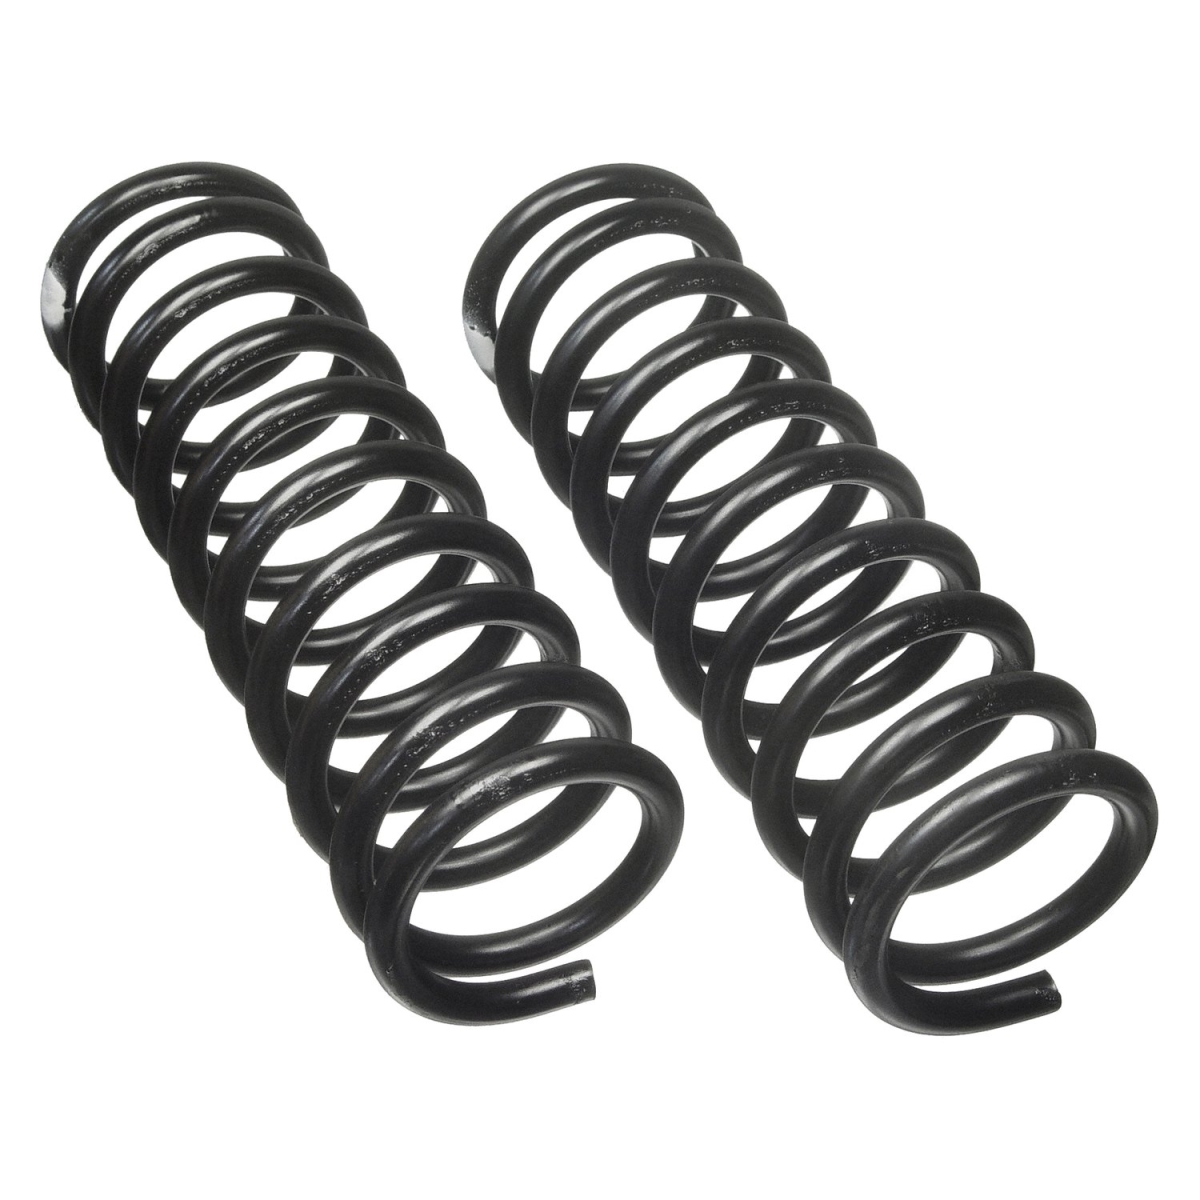 UPC 080066106014 product image for Moog M12-6330 Front Coil Springs for 1969-1972 Chevrolet Chevelle | upcitemdb.com